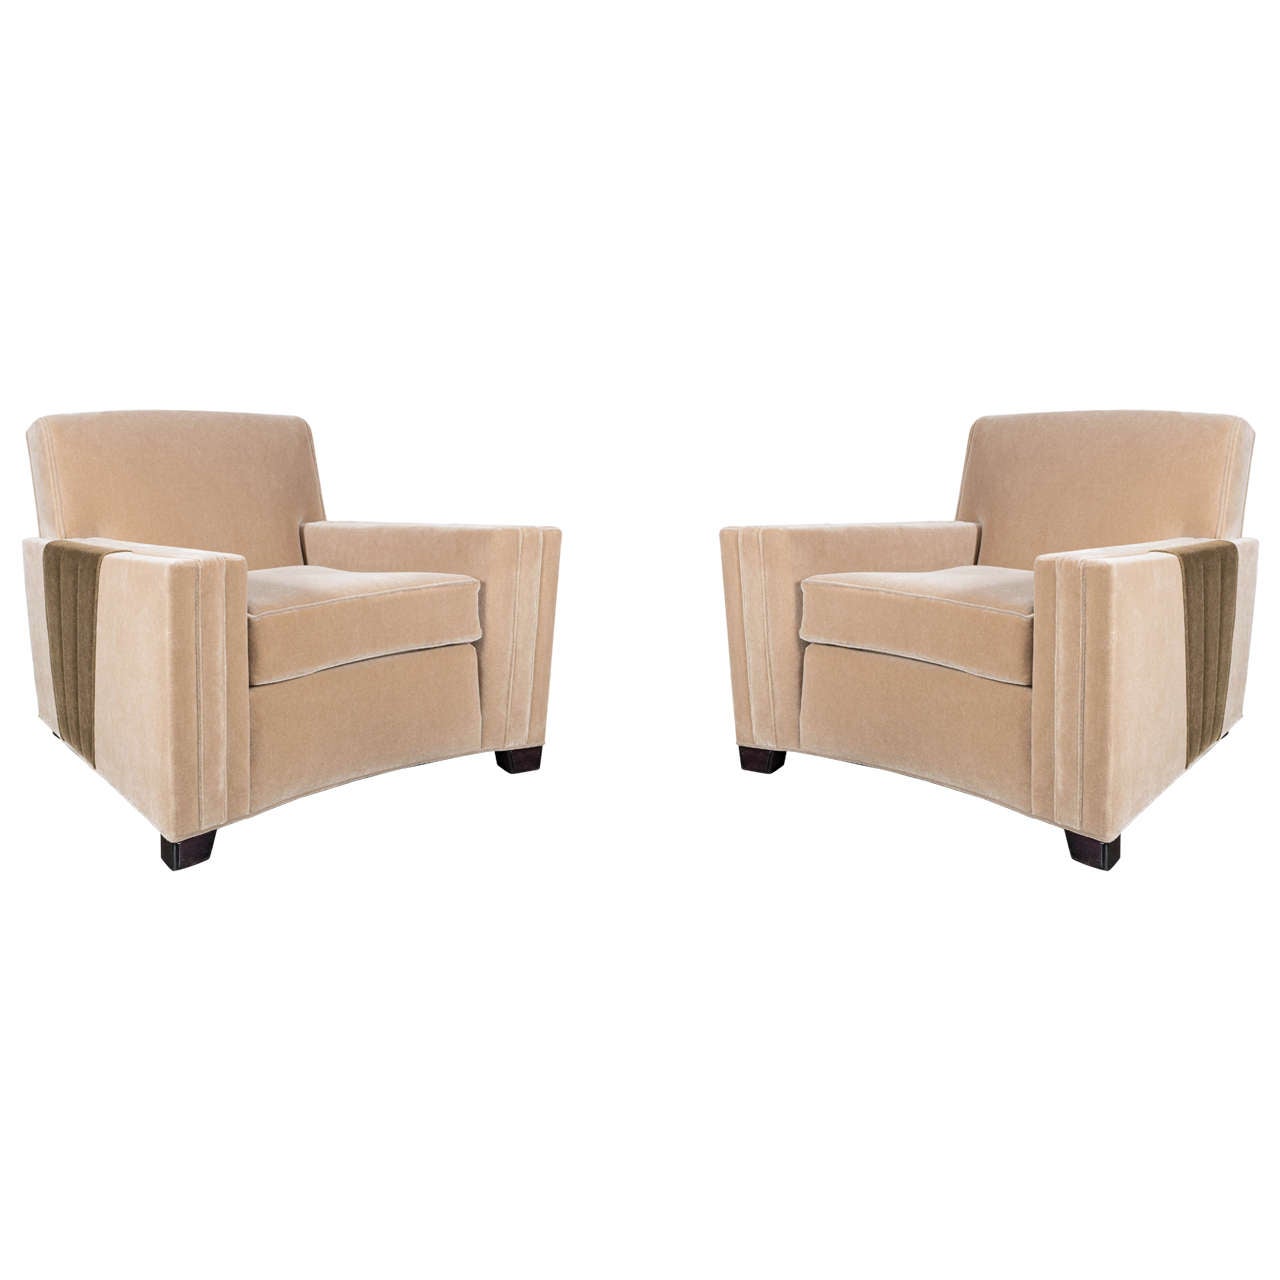 Pair of Art Deco Club Chairs in Camel Hued Mohair with Inset Deco Fan Design